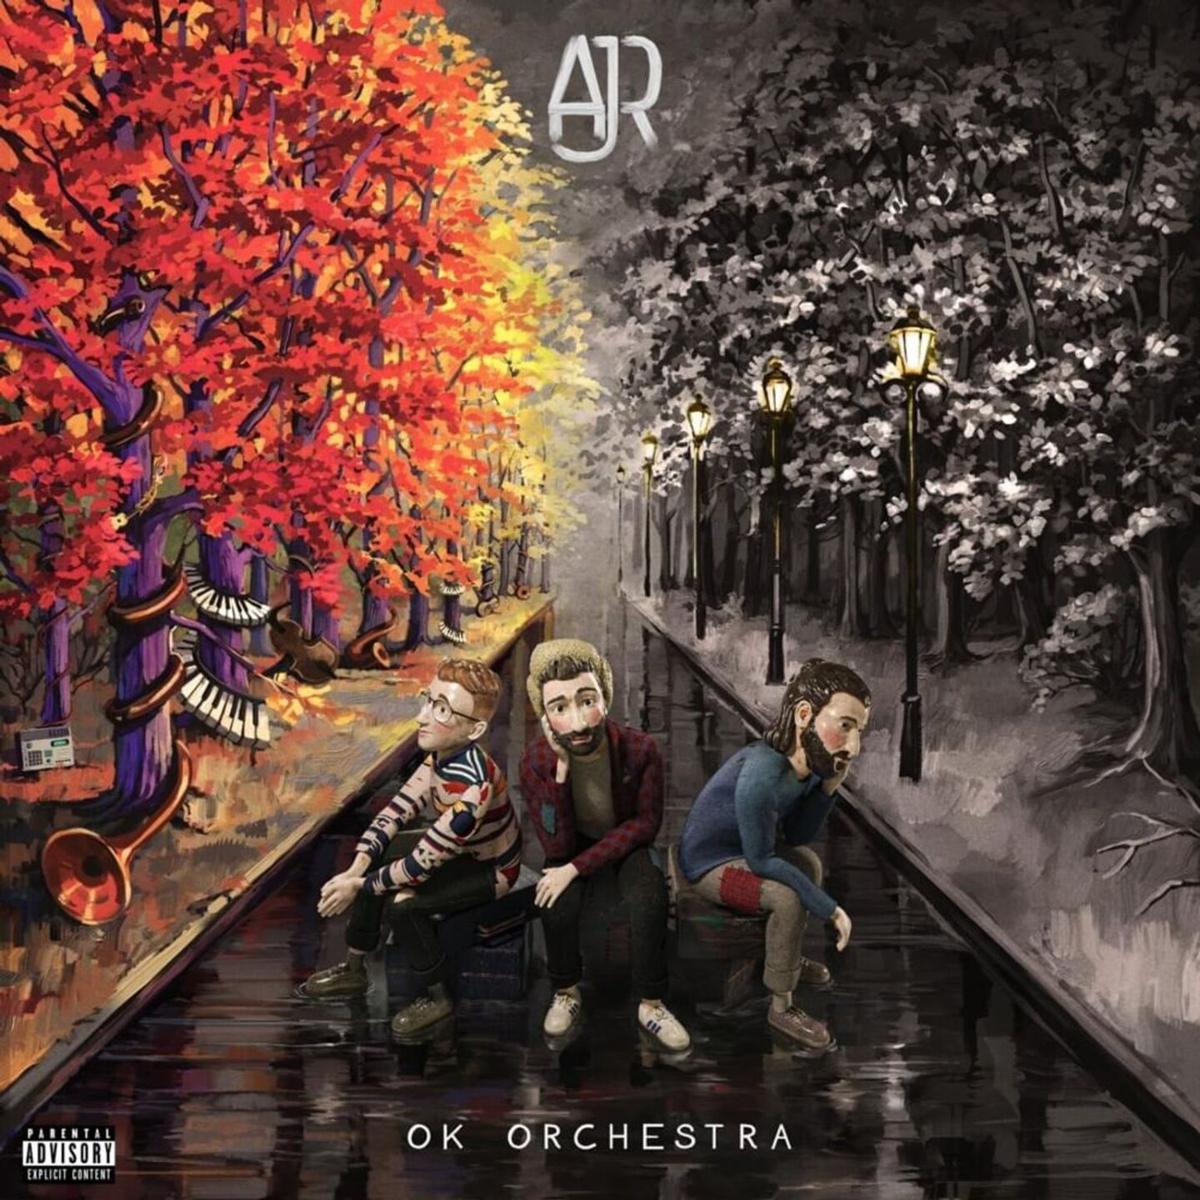 AJR’s new album “Ok Orchestra” breaks political and musical boundaries